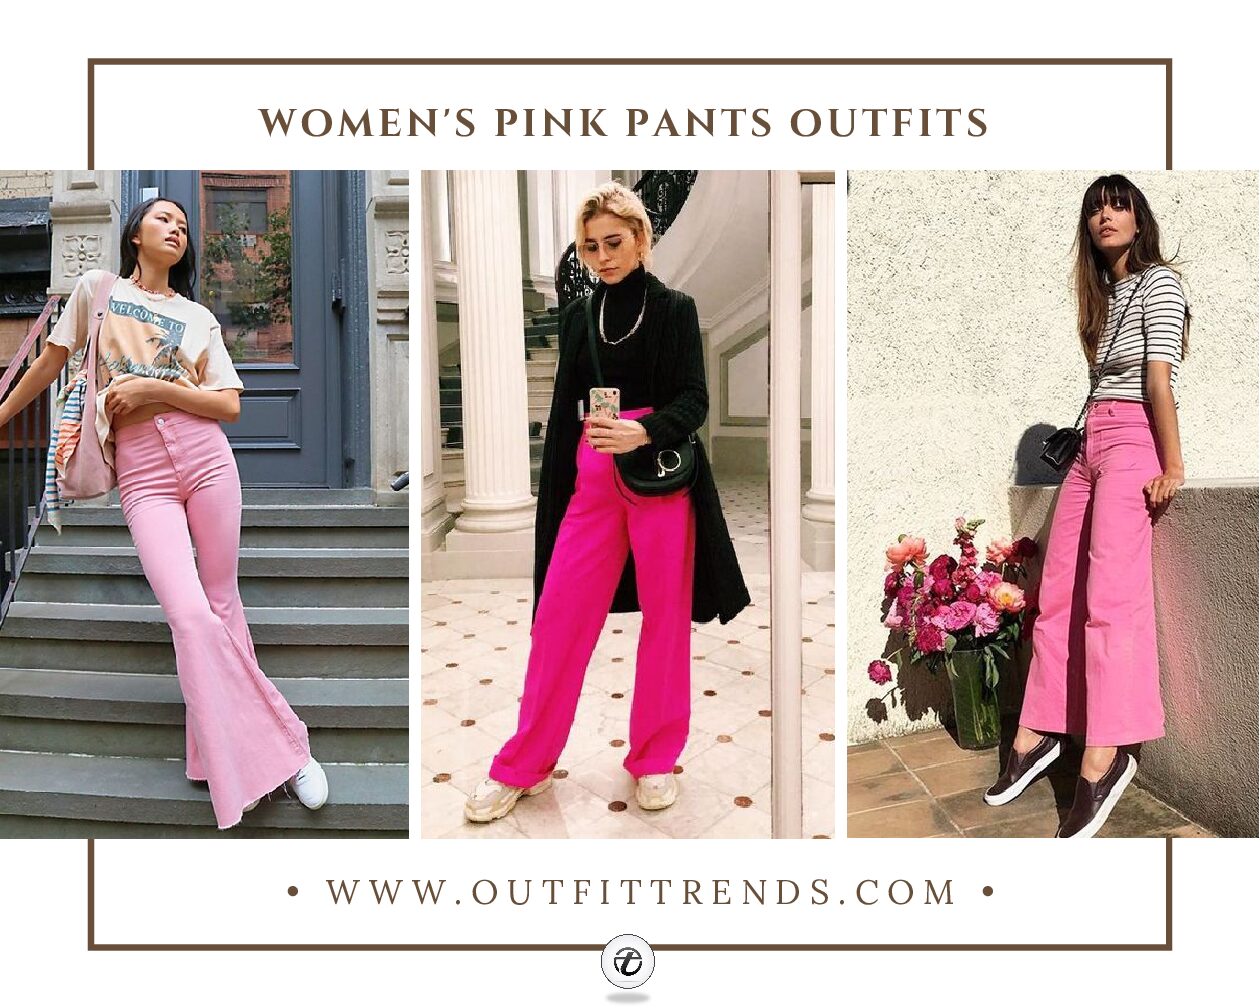 Women’s Pink Pants Outfits: 19 Ways To Wear Pink Pants